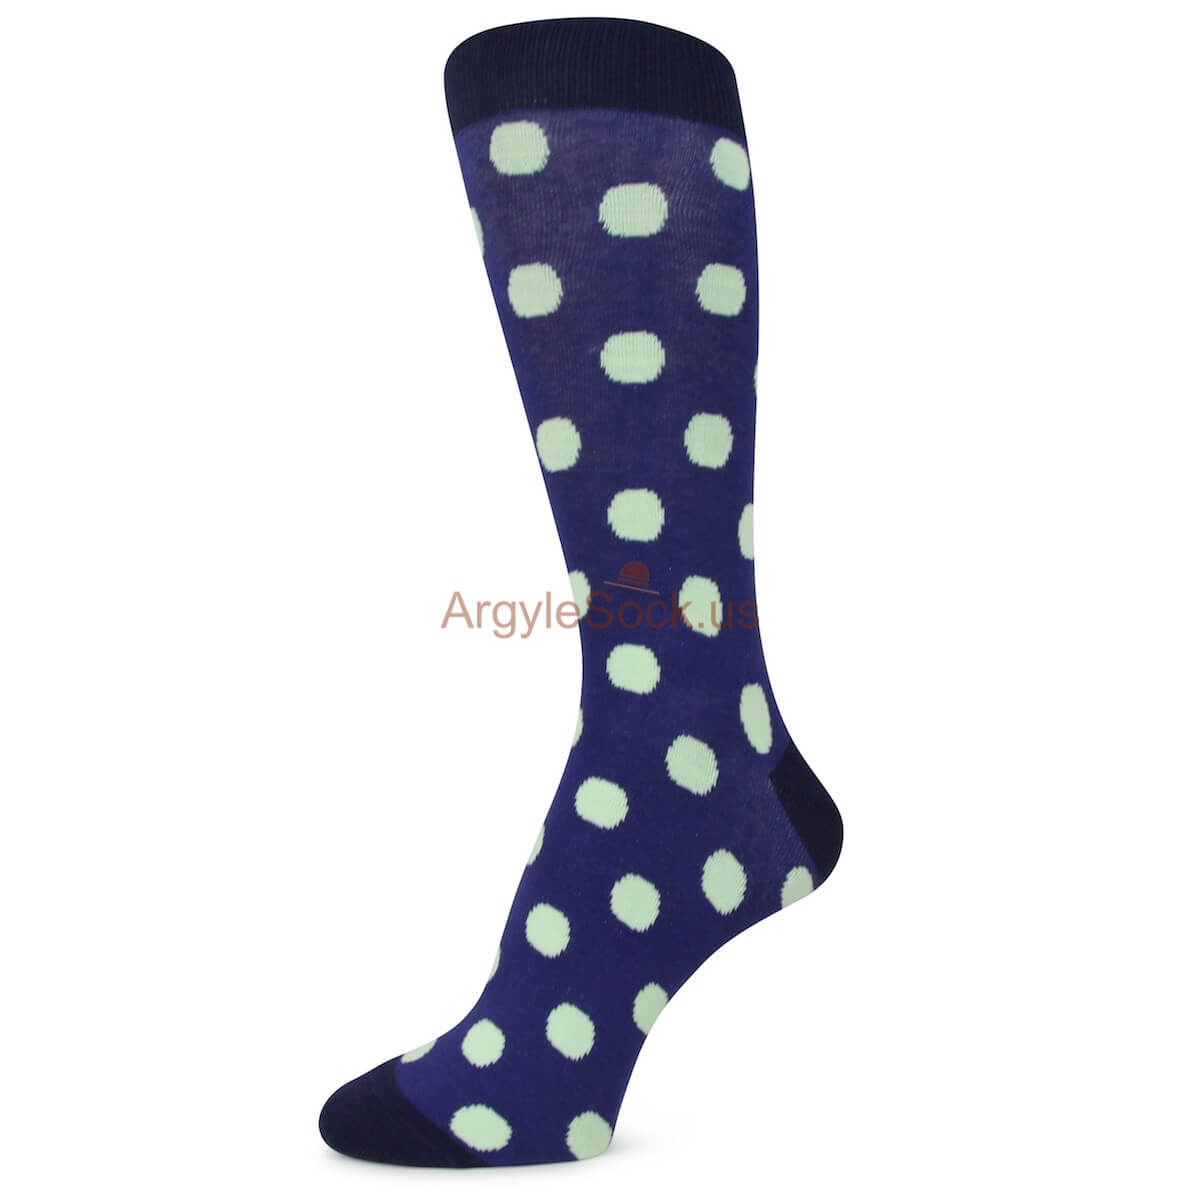 Dark Blue and Black with Glow in The Dark Dots Mens Socks